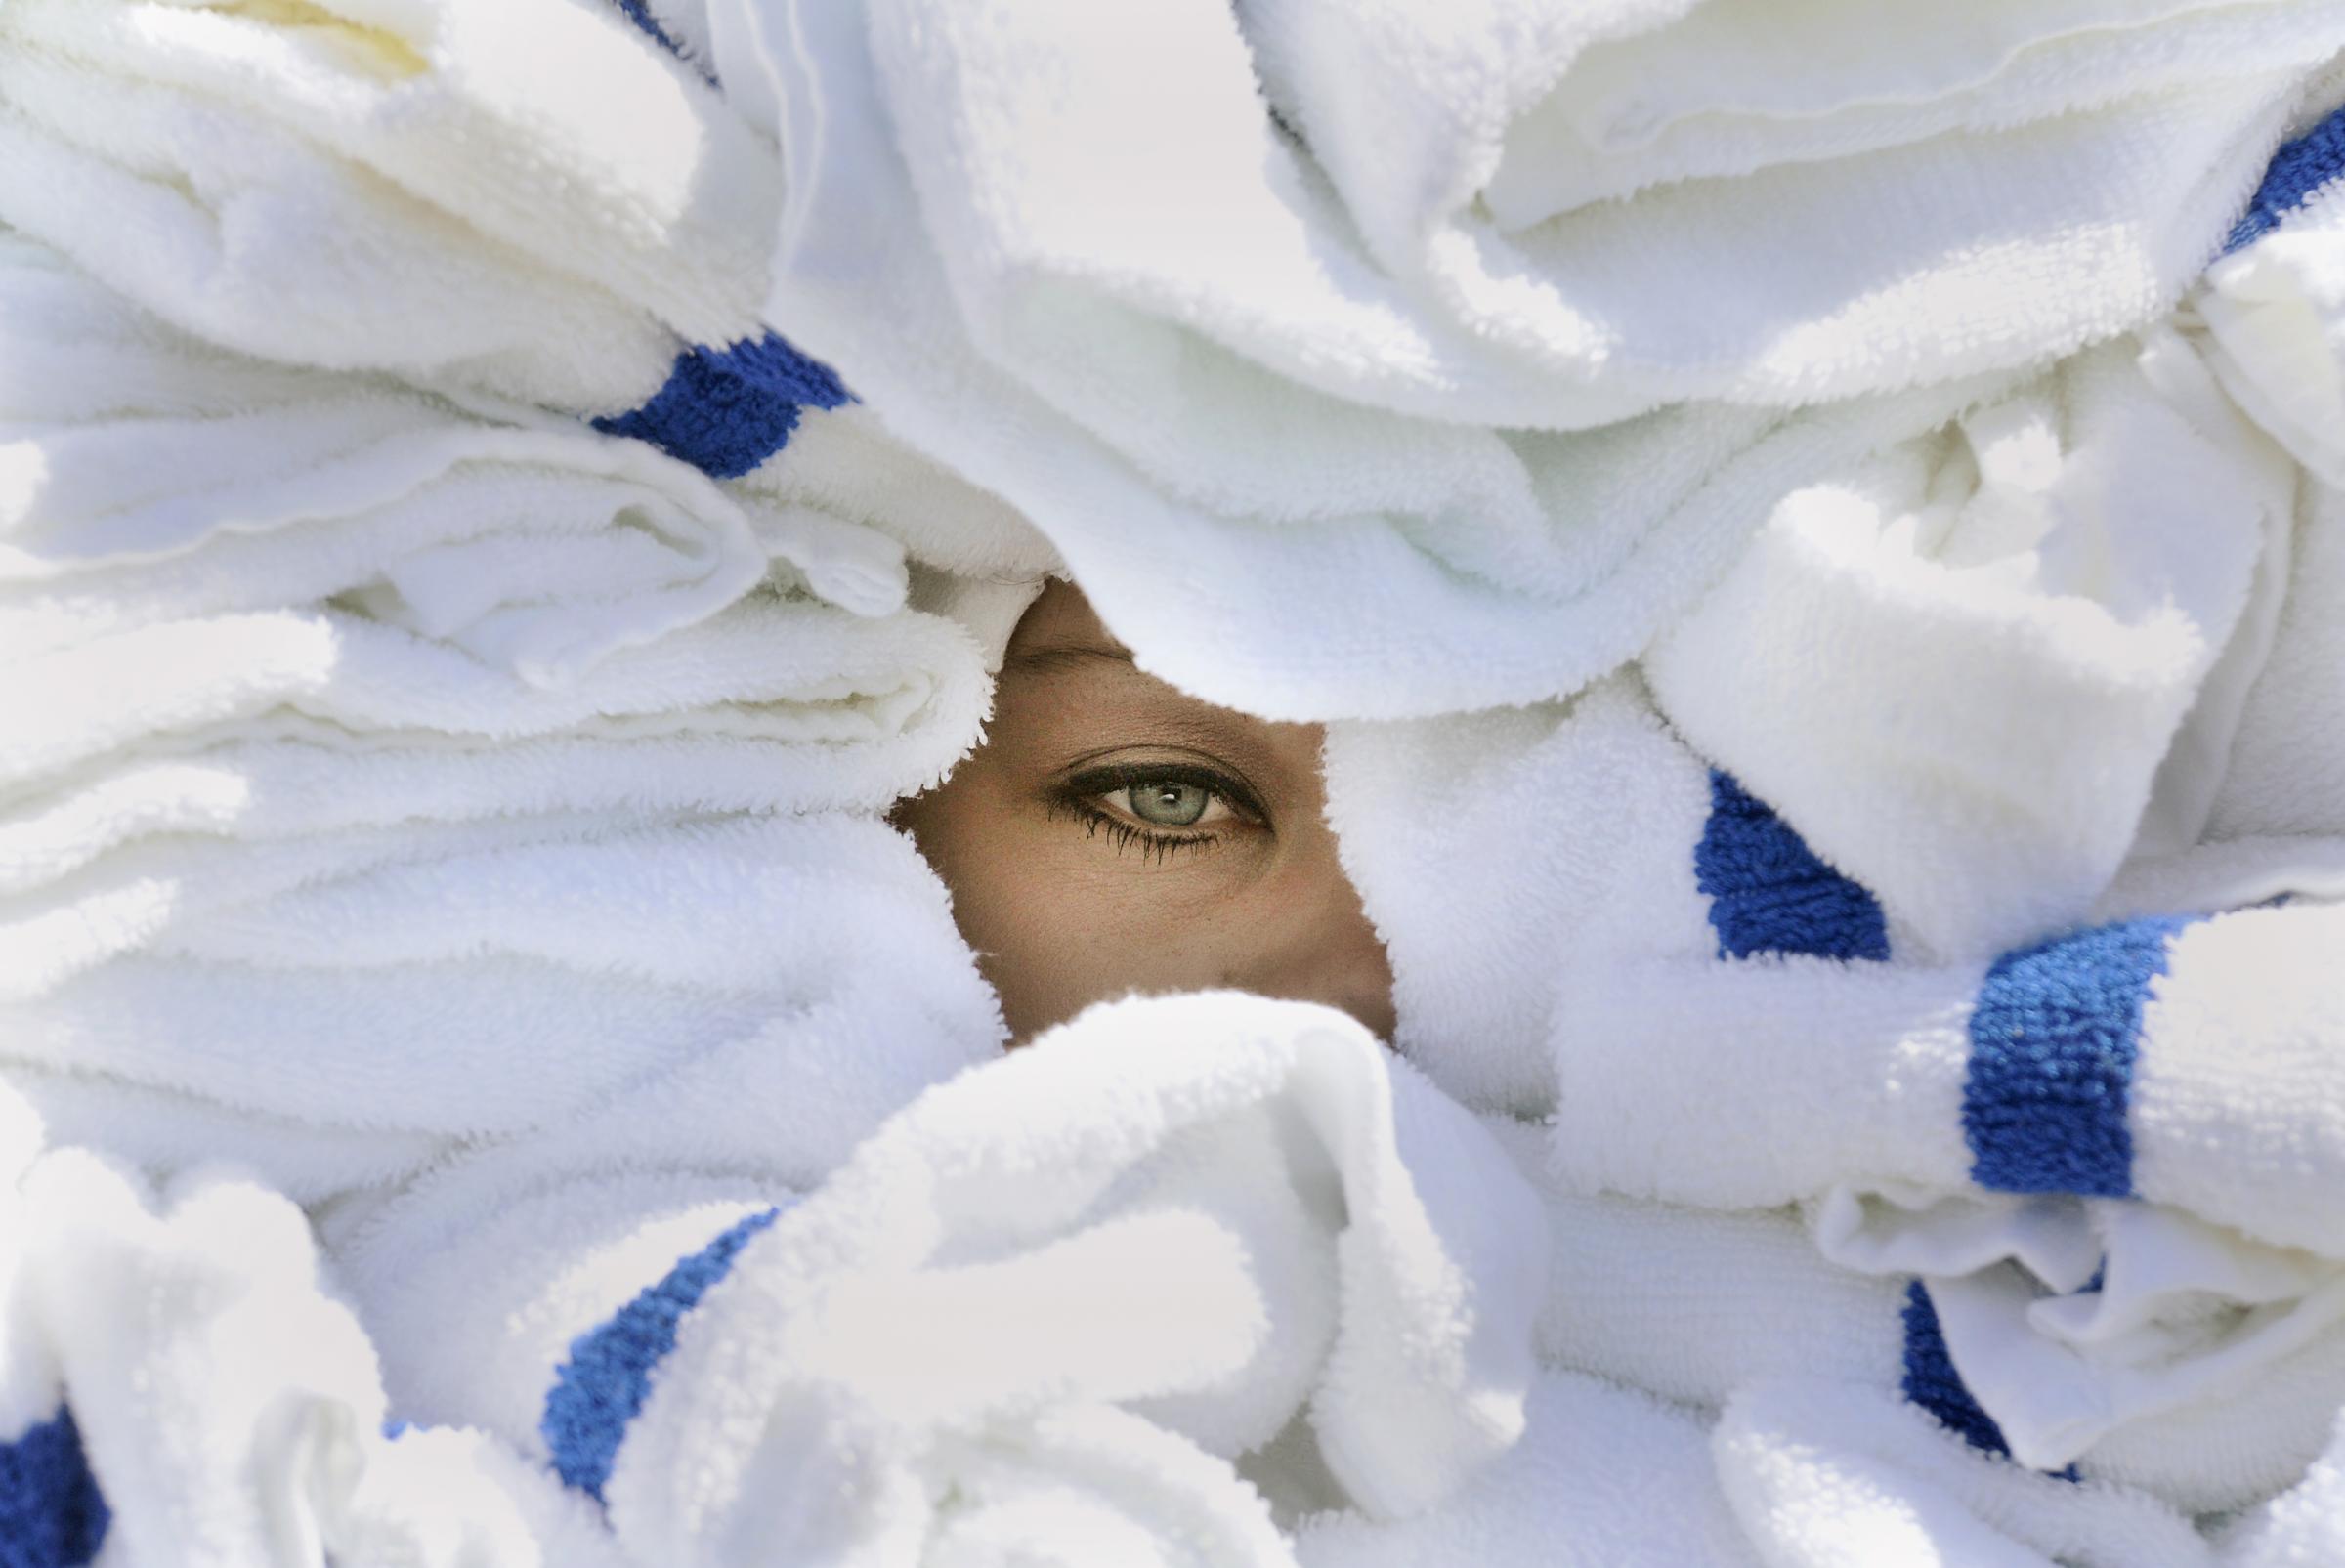 Rebecca Redwine from Grandma's in the Park has one eye visible from between nealry 100 towels as she competes in the towel carrying contest during the 10th annual Iron Range Housekeeping Olympics on Sept. 8, 2014, at AmericInn in Virginia, Minn.